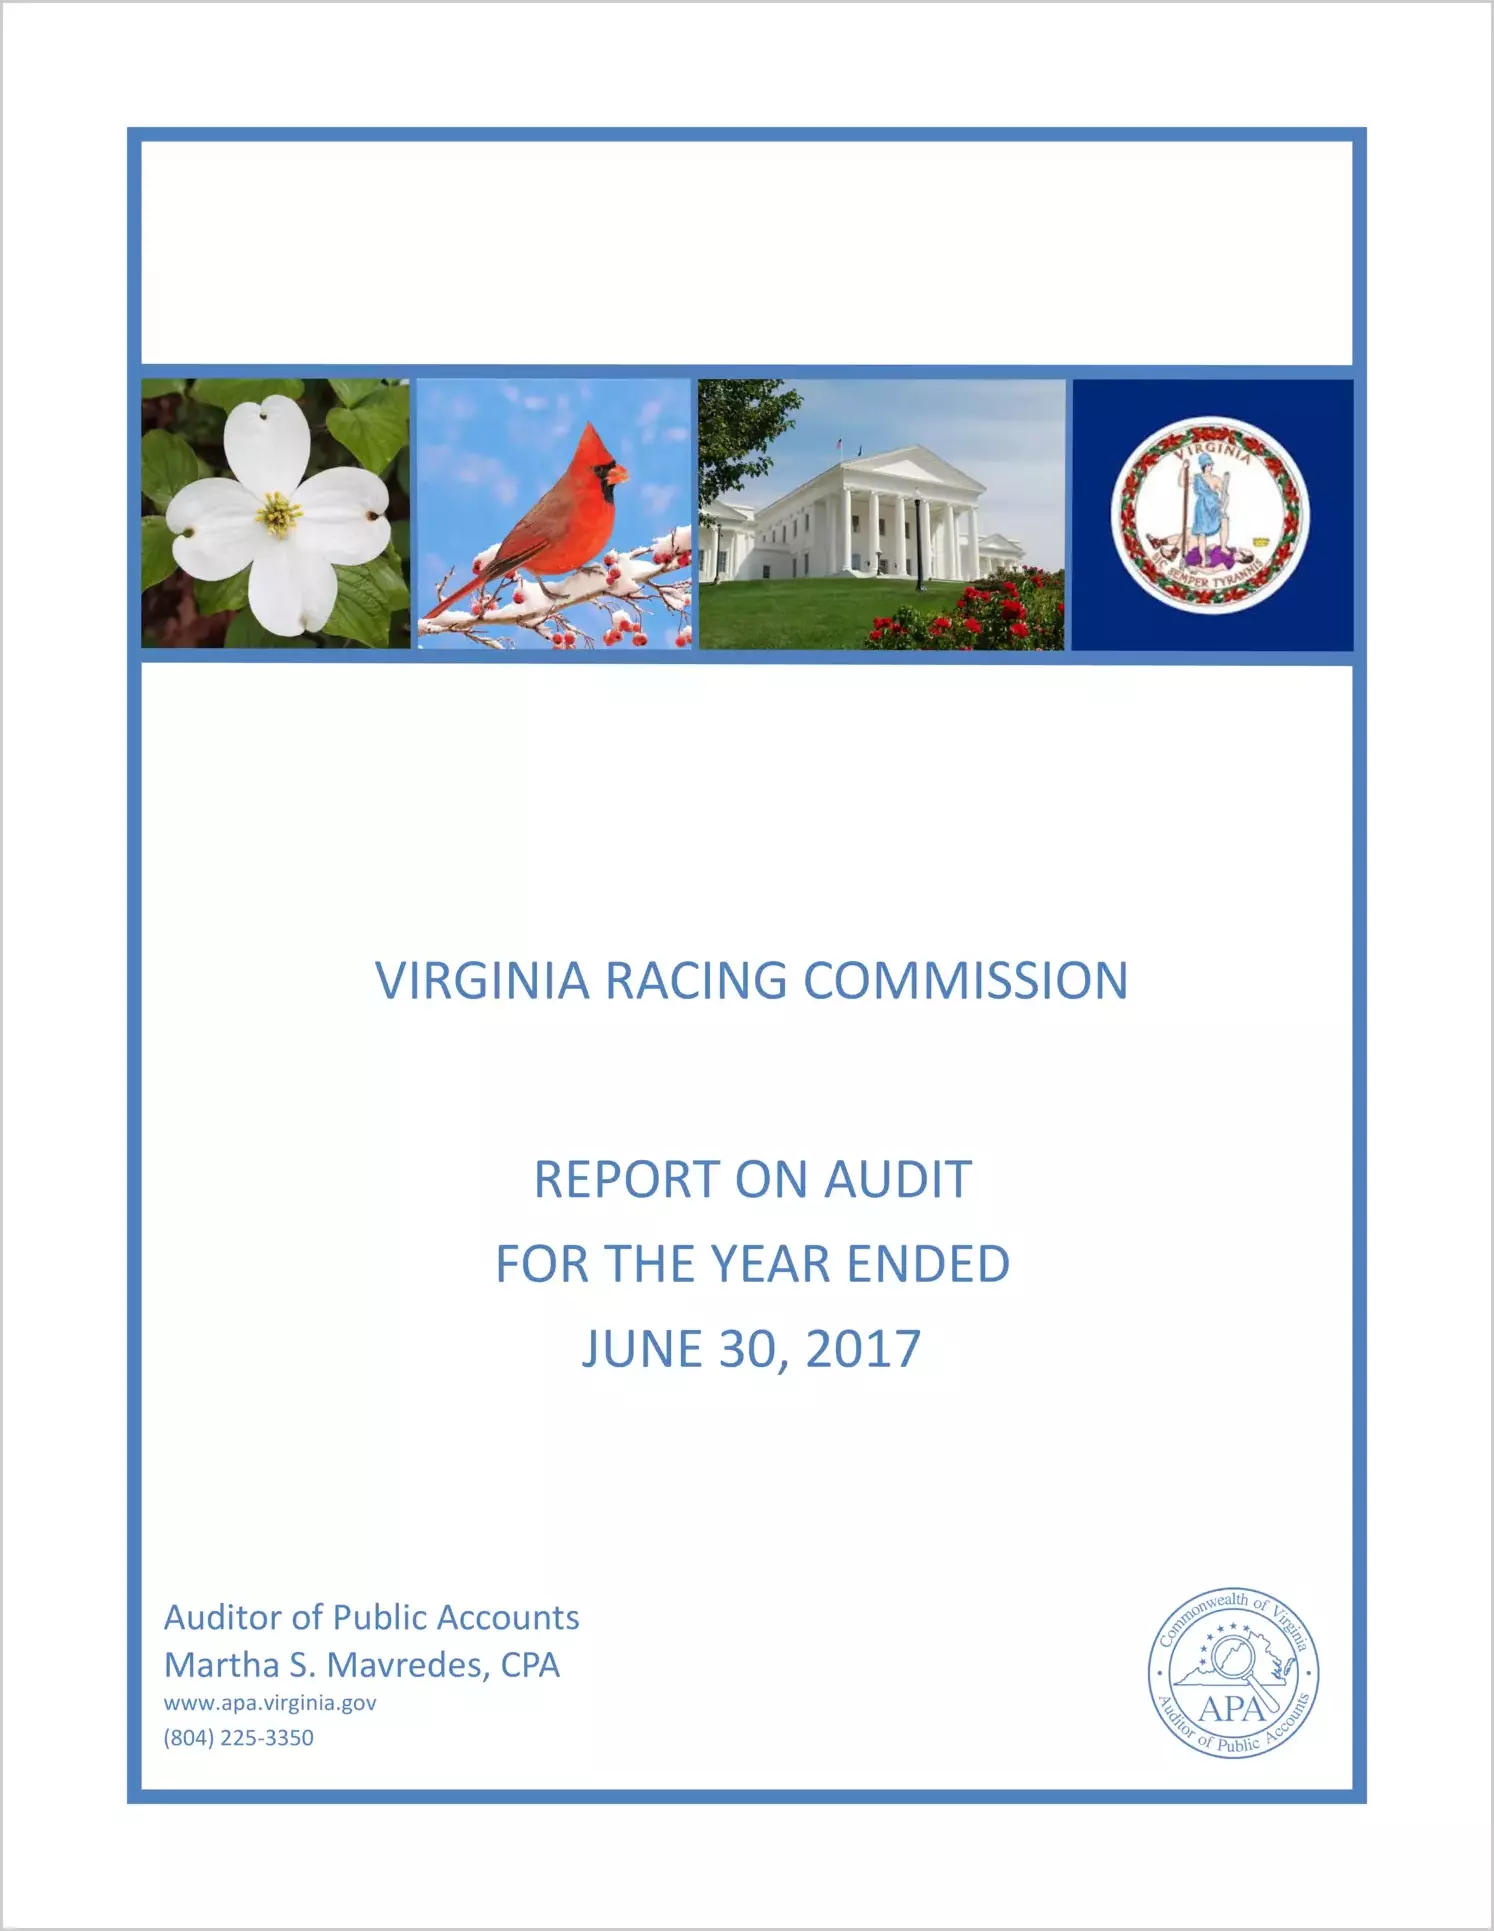 Virginia Racing Commission for the year ended June 30, 2017